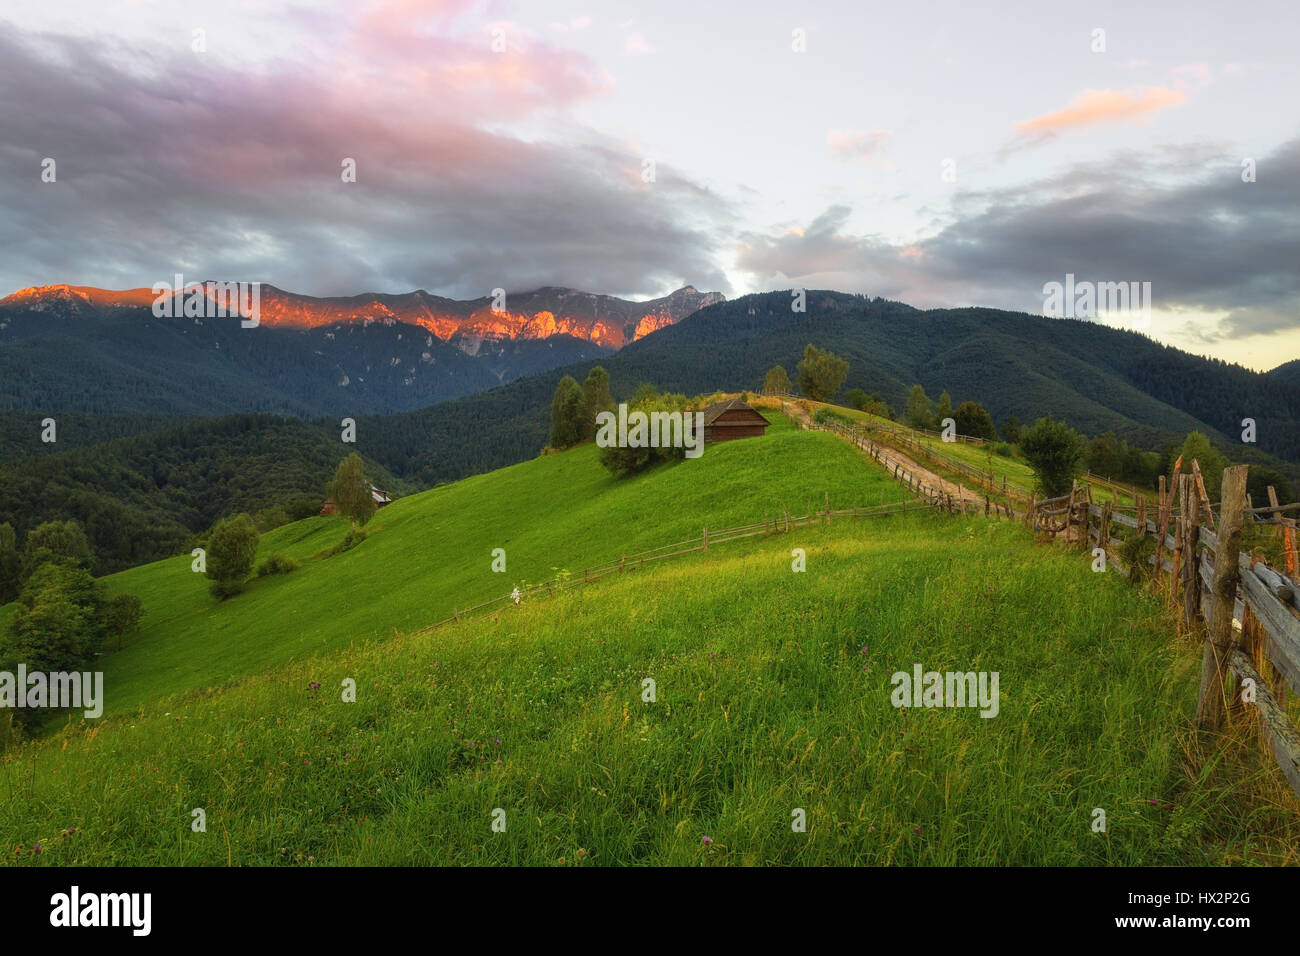 Beautiful sunset with green fields and sunlit mountain range in the background photographed in Transylvania near Brasov on a beautiful hilly setting Stock Photo